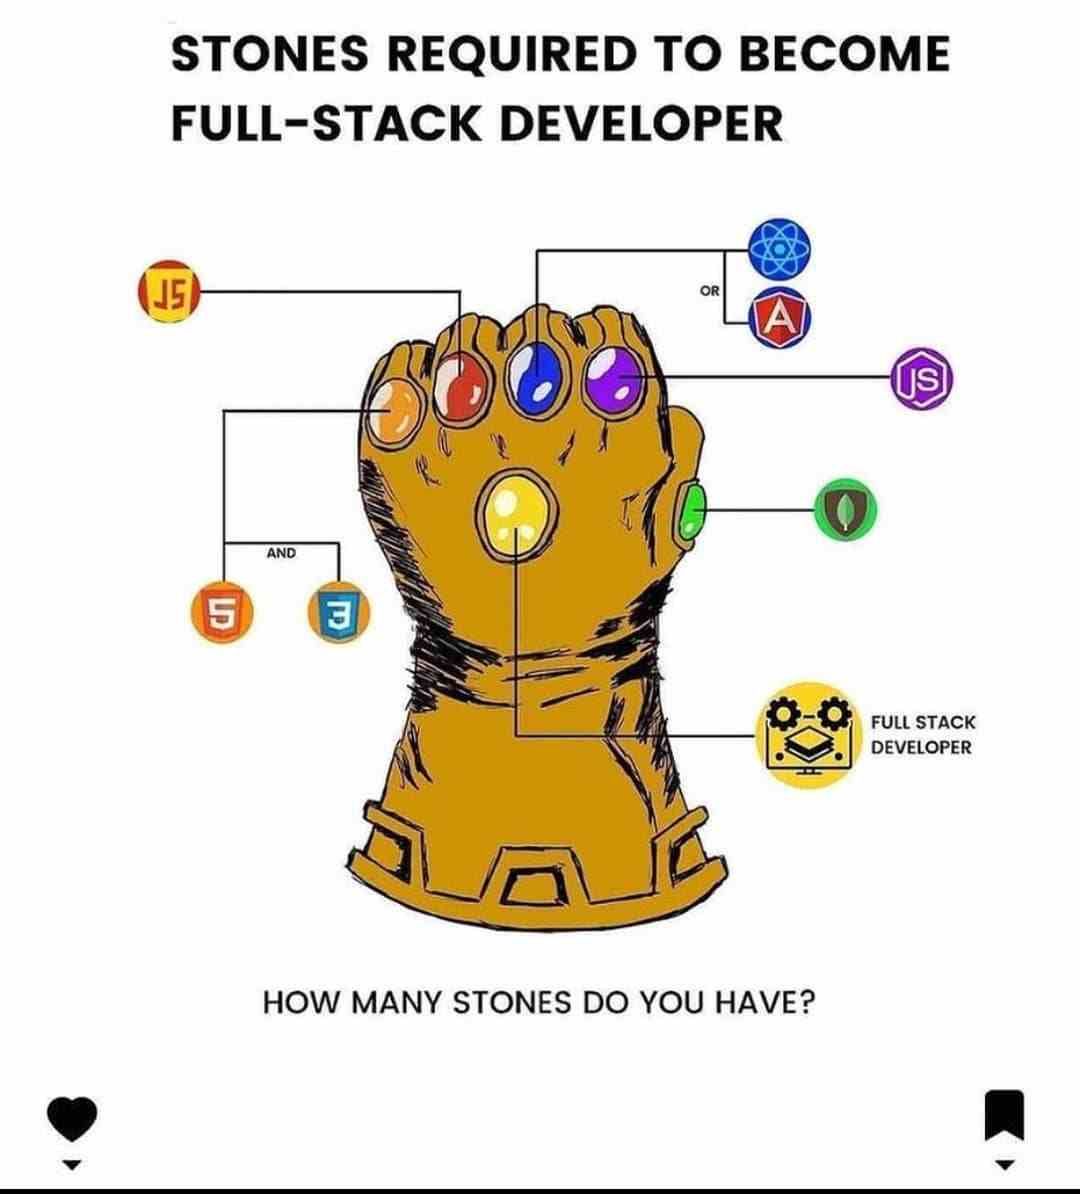 Stones Required To Become Full-Stack Developer